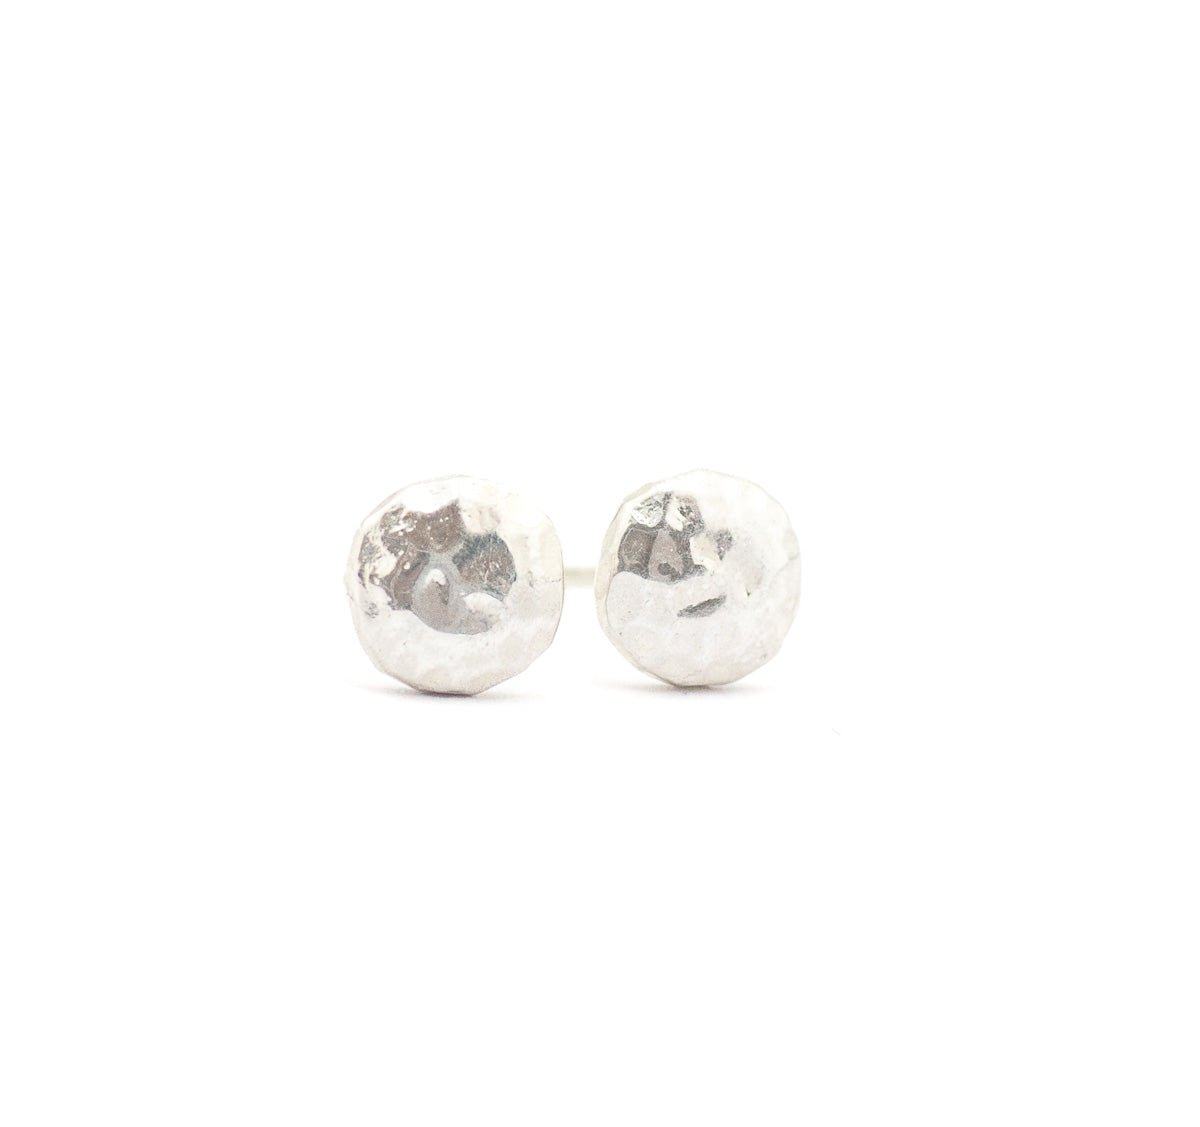 Sterling Silver Hammered Round Stud Earrings